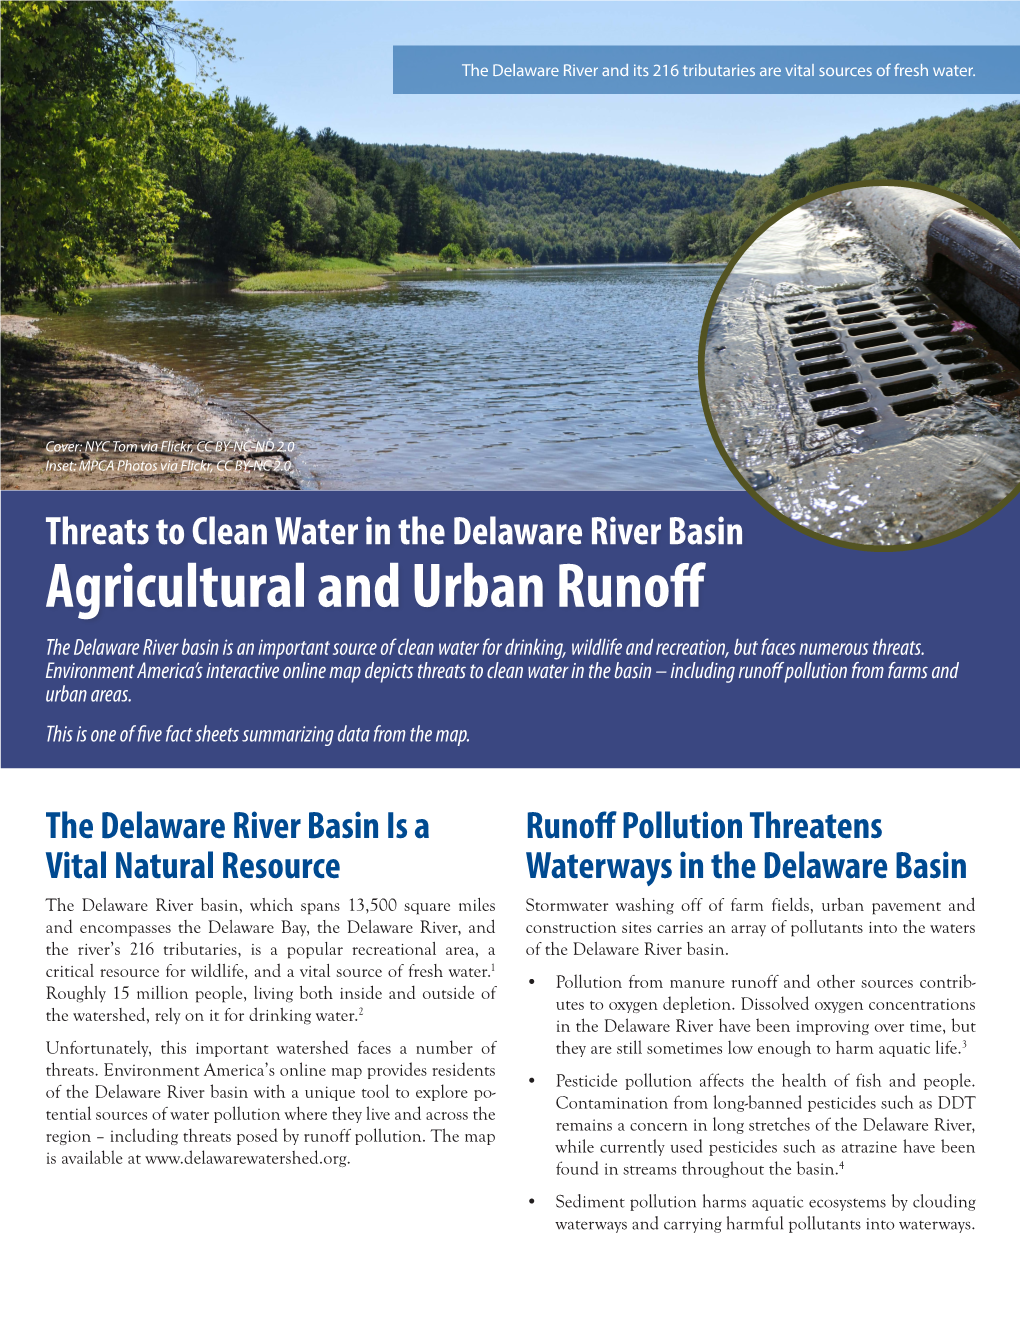 Agricultural and Urban Runoff the Delaware River Basin Is an Important Source of Clean Water for Drinking, Wildlife and Recreation, but Faces Numerous Threats